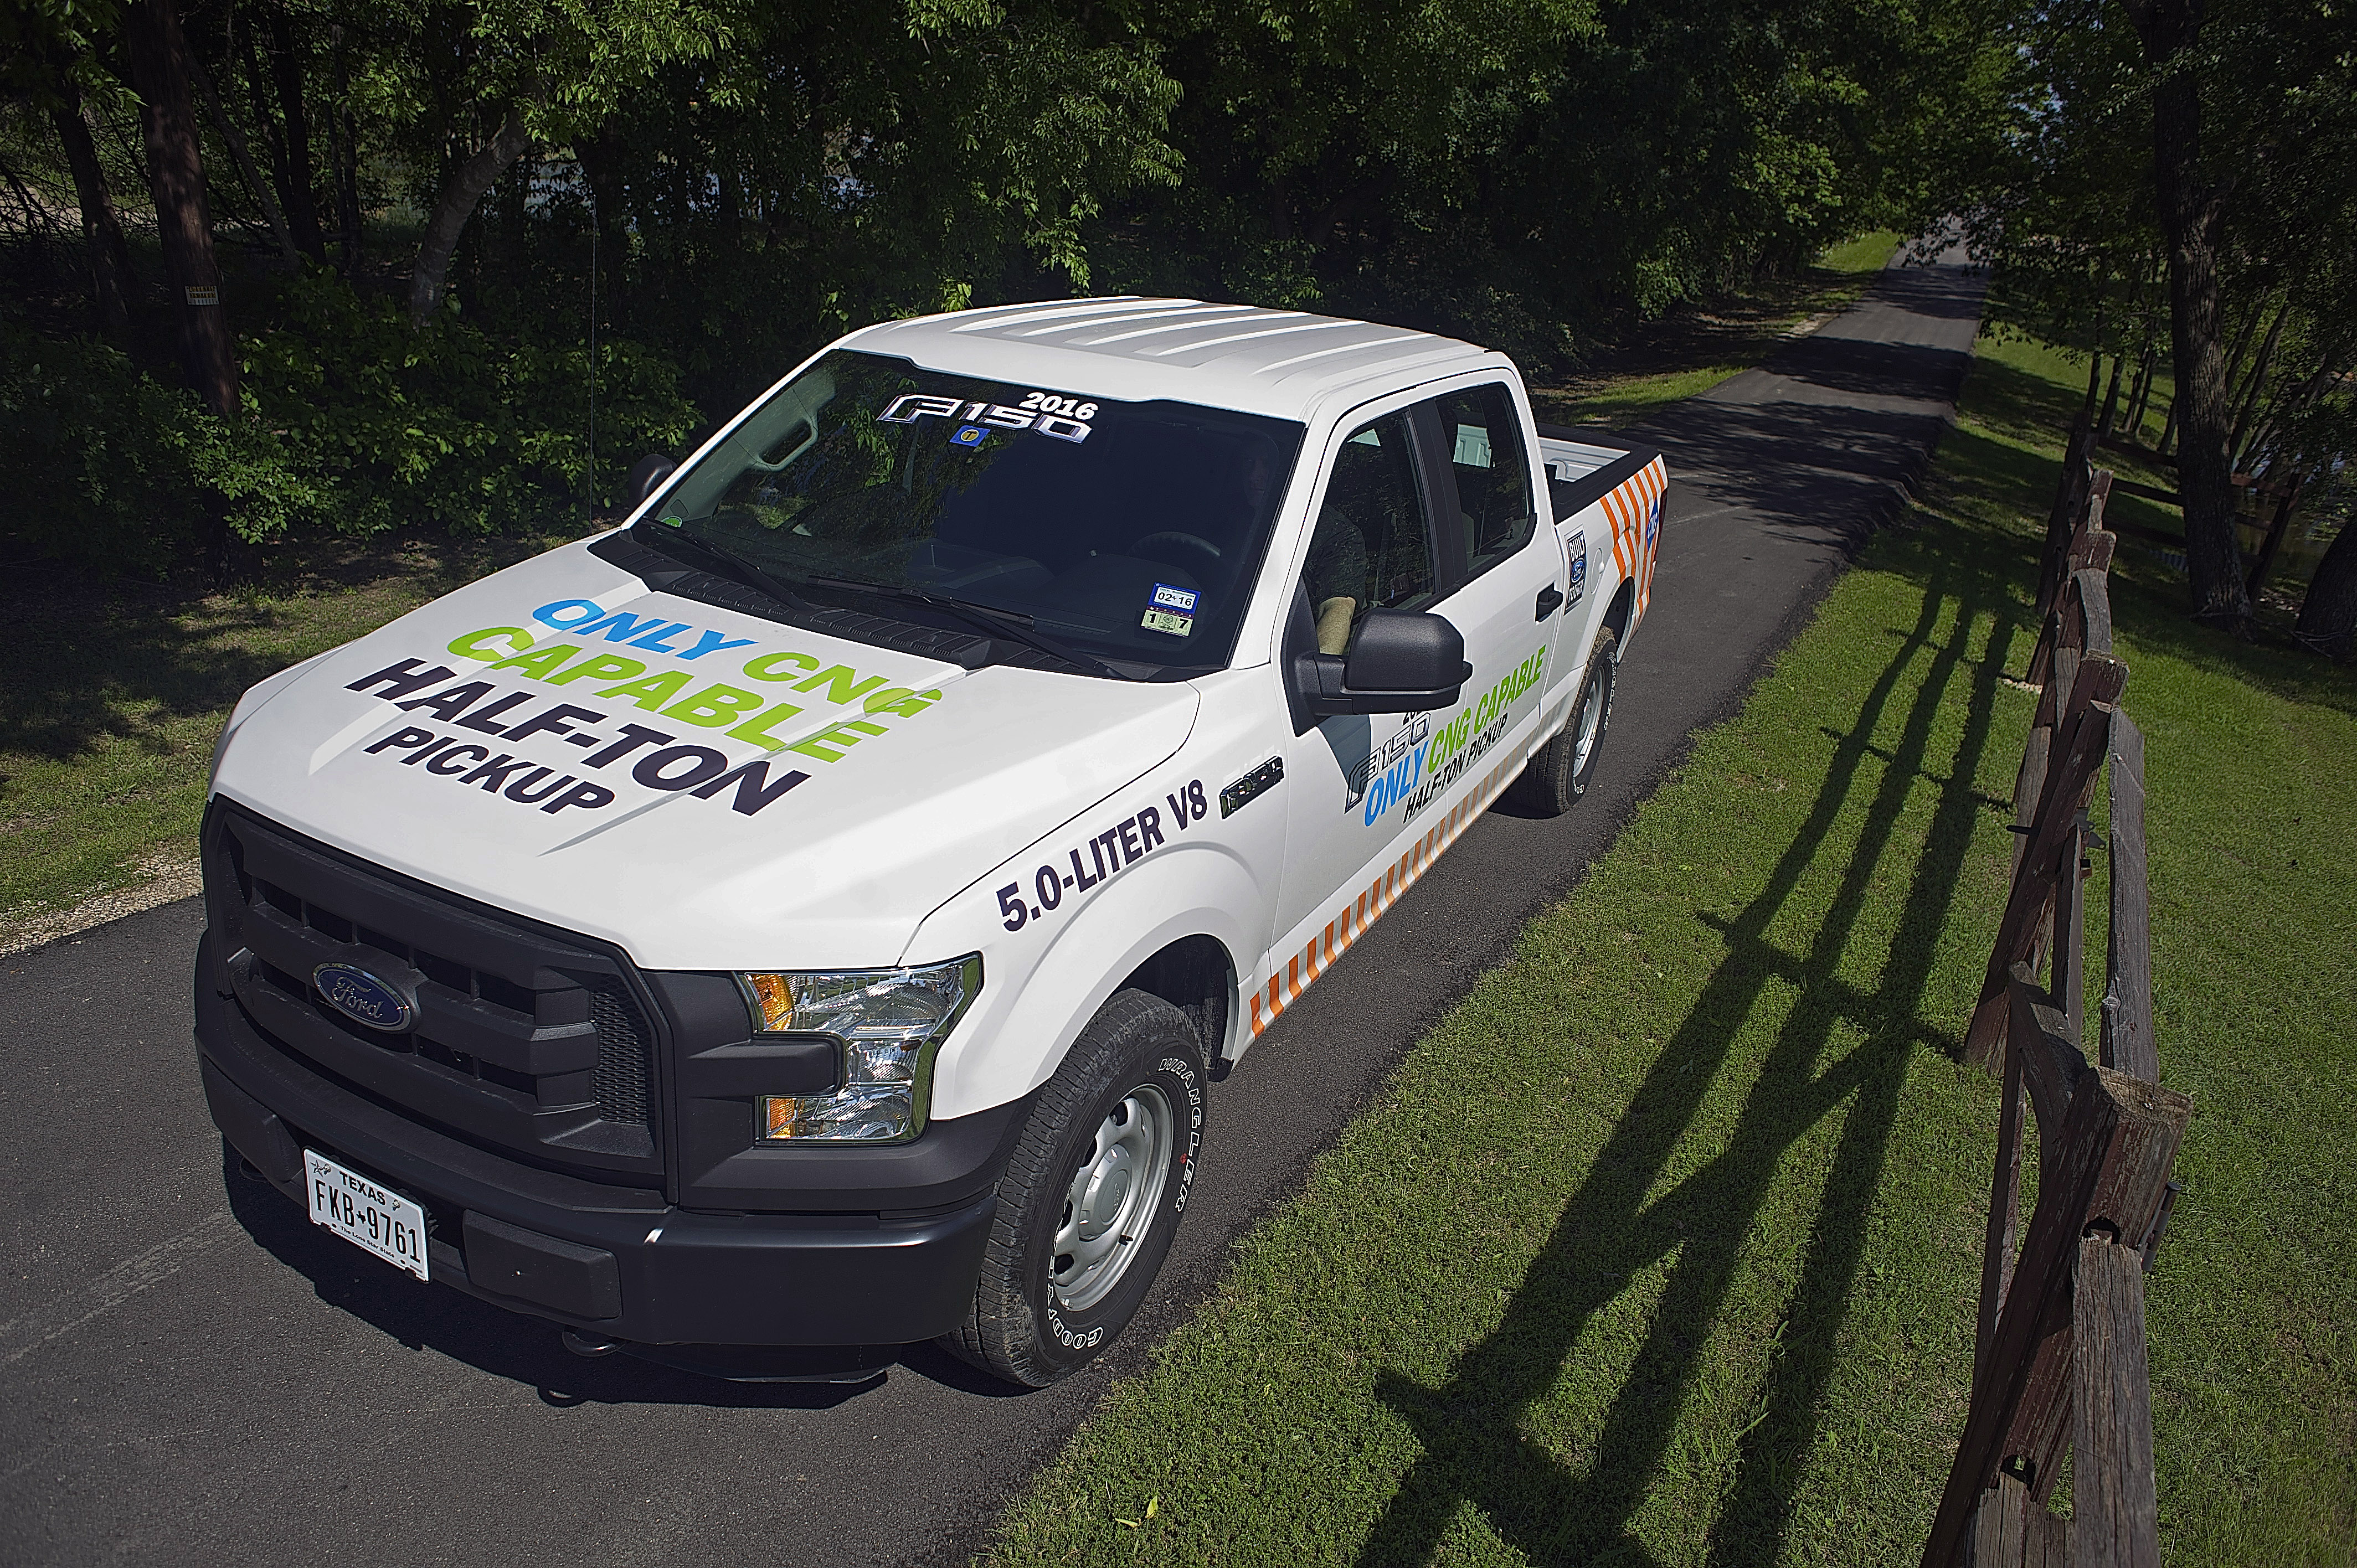 Ford F 150 Special Service Vehicle Package Added As No Cost Option For 